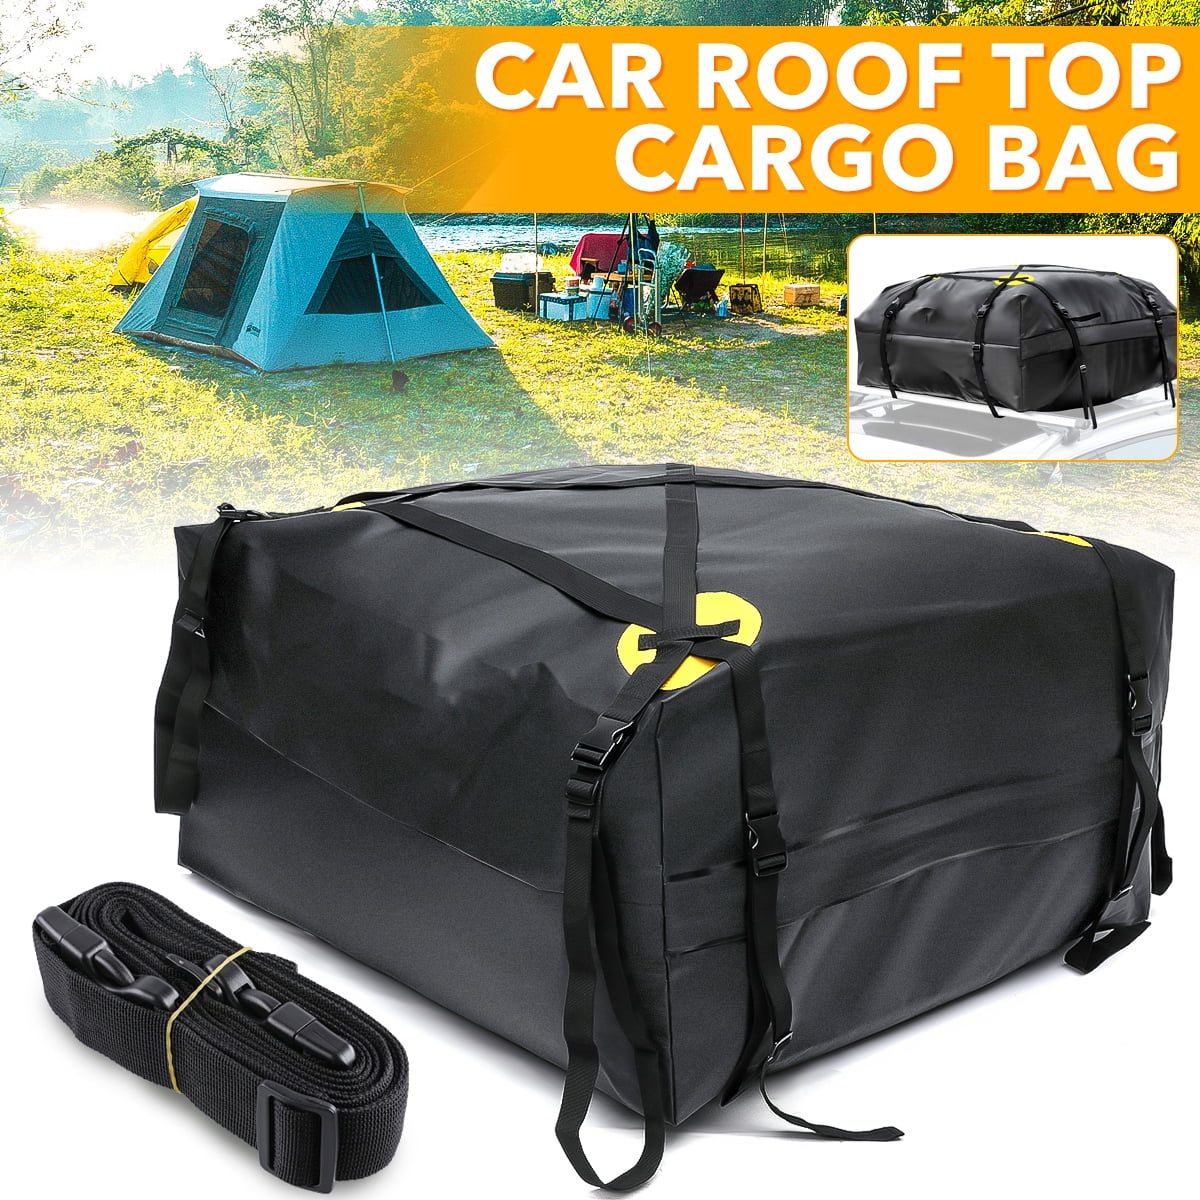 AUXKO Cargo Roof Bag Top Carrier 15 Cubic Expands to 19 Cubic ft 600D PVC Car Rooftop Carrier Travel Storage Luggage Bag Soft-Shell Fits All Vehicle with/Without Rack 